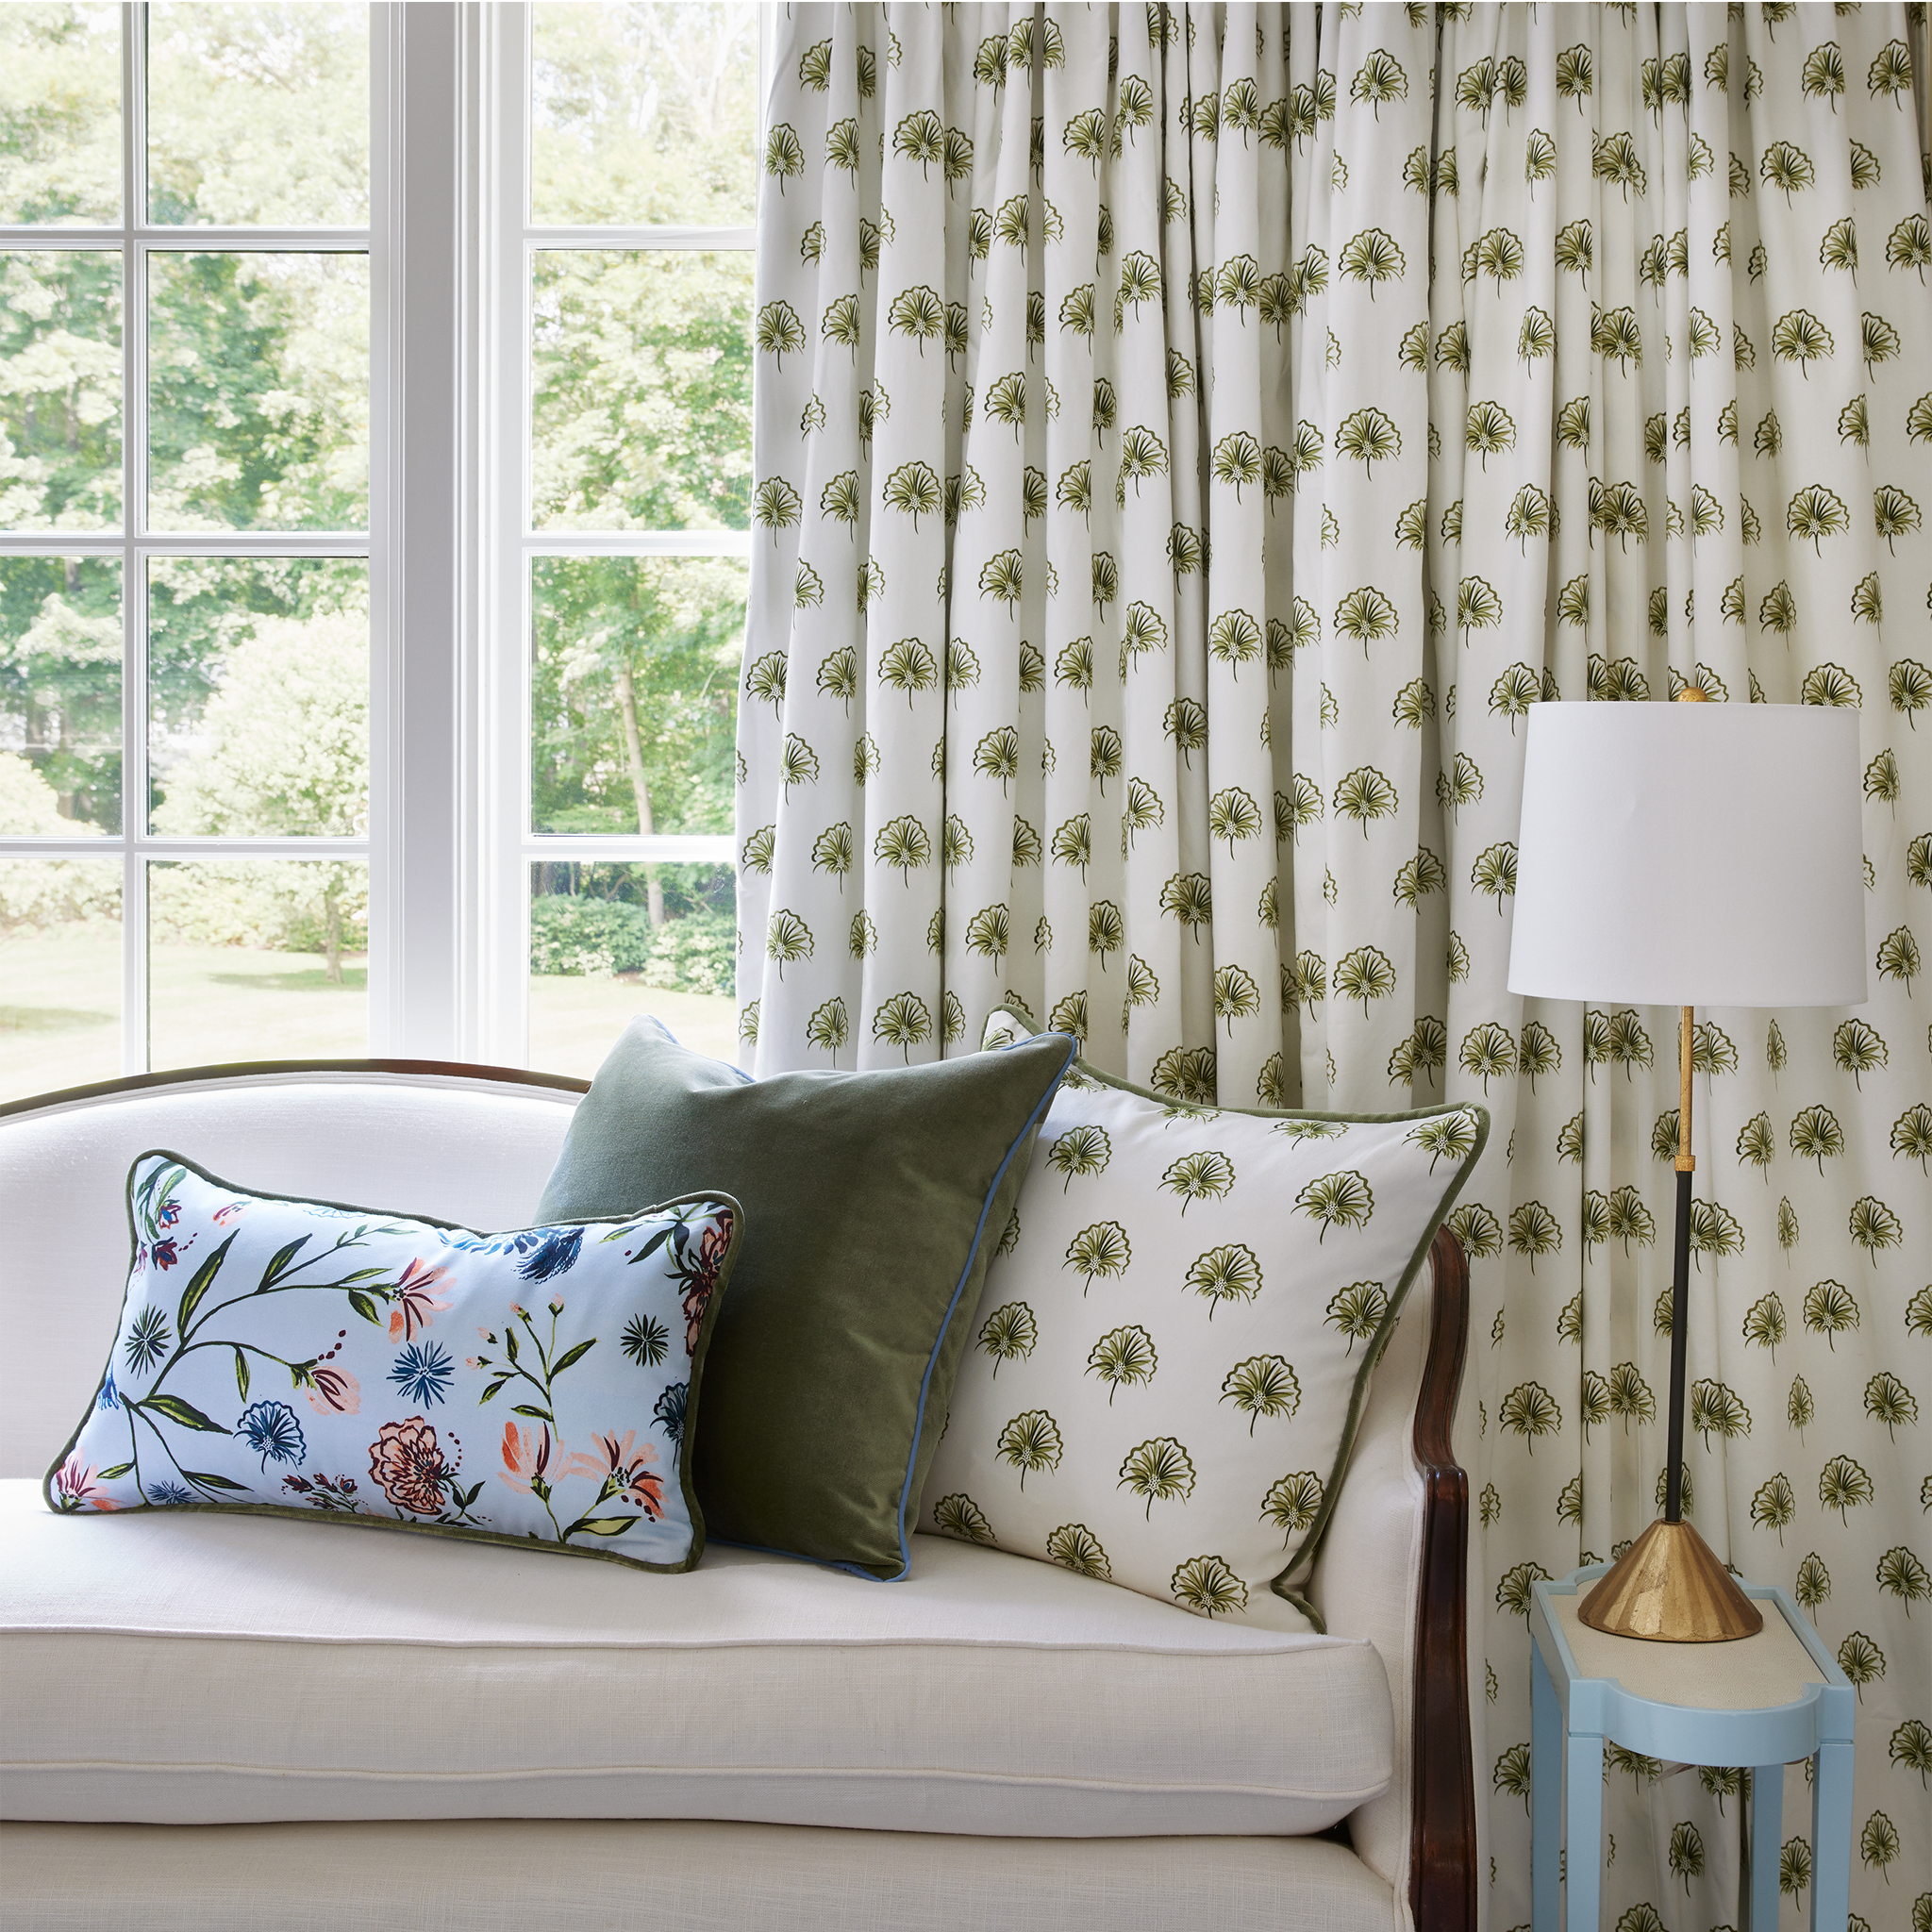 Living Room styled with Green Floral Printed Curtain and white couch in front with Blue Chinoiserie printed pillow, fern green pillow, and green floral printed pillow next to small baby blue table with gold and white lamp on top